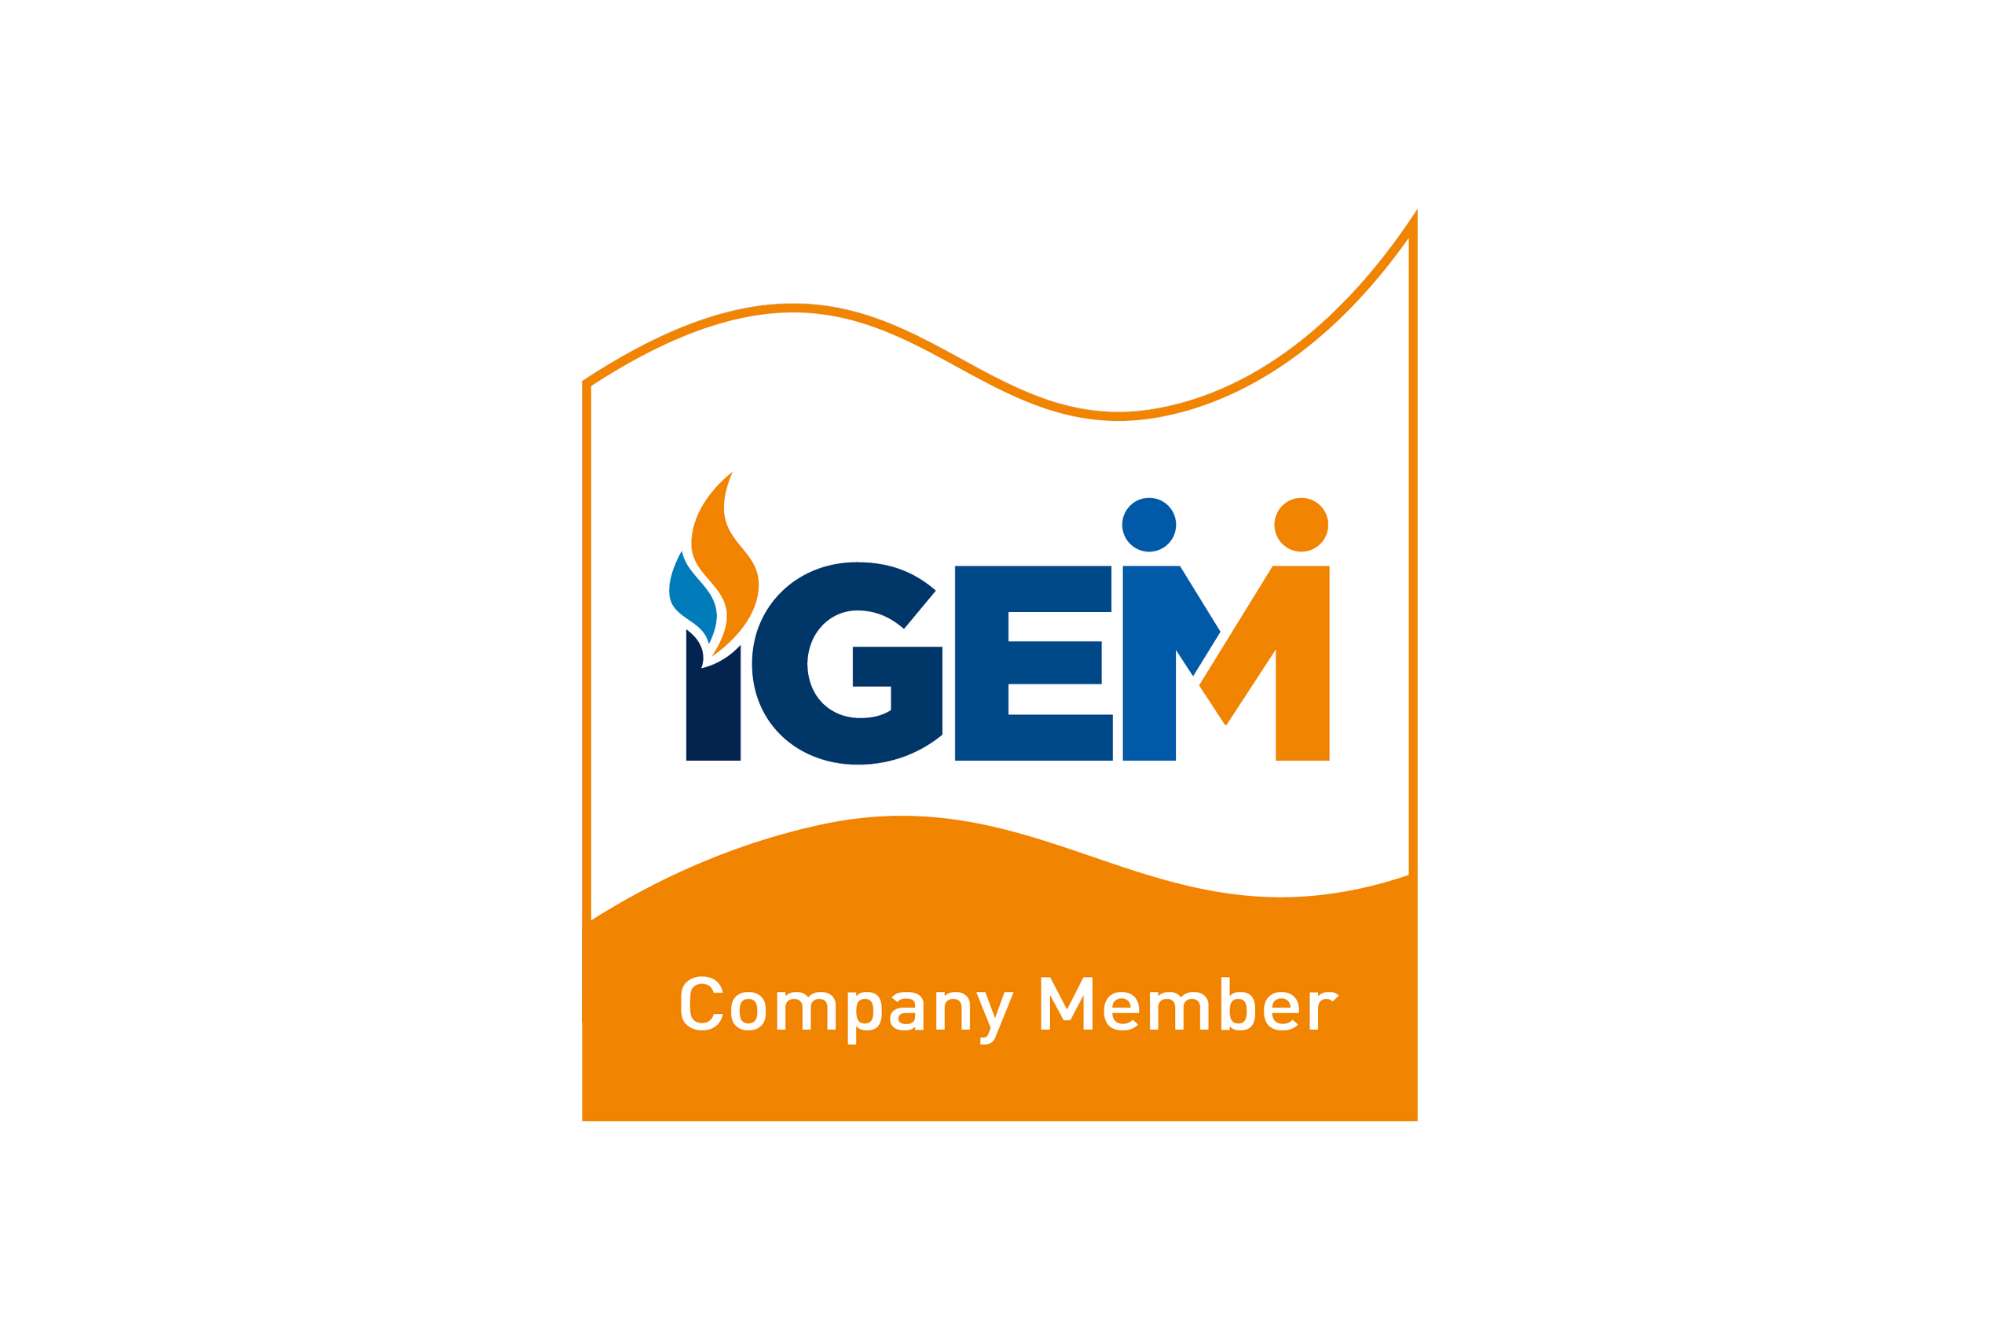 JTL becomes a member of the Institution of Gas Engineers & Managers (IGEM)